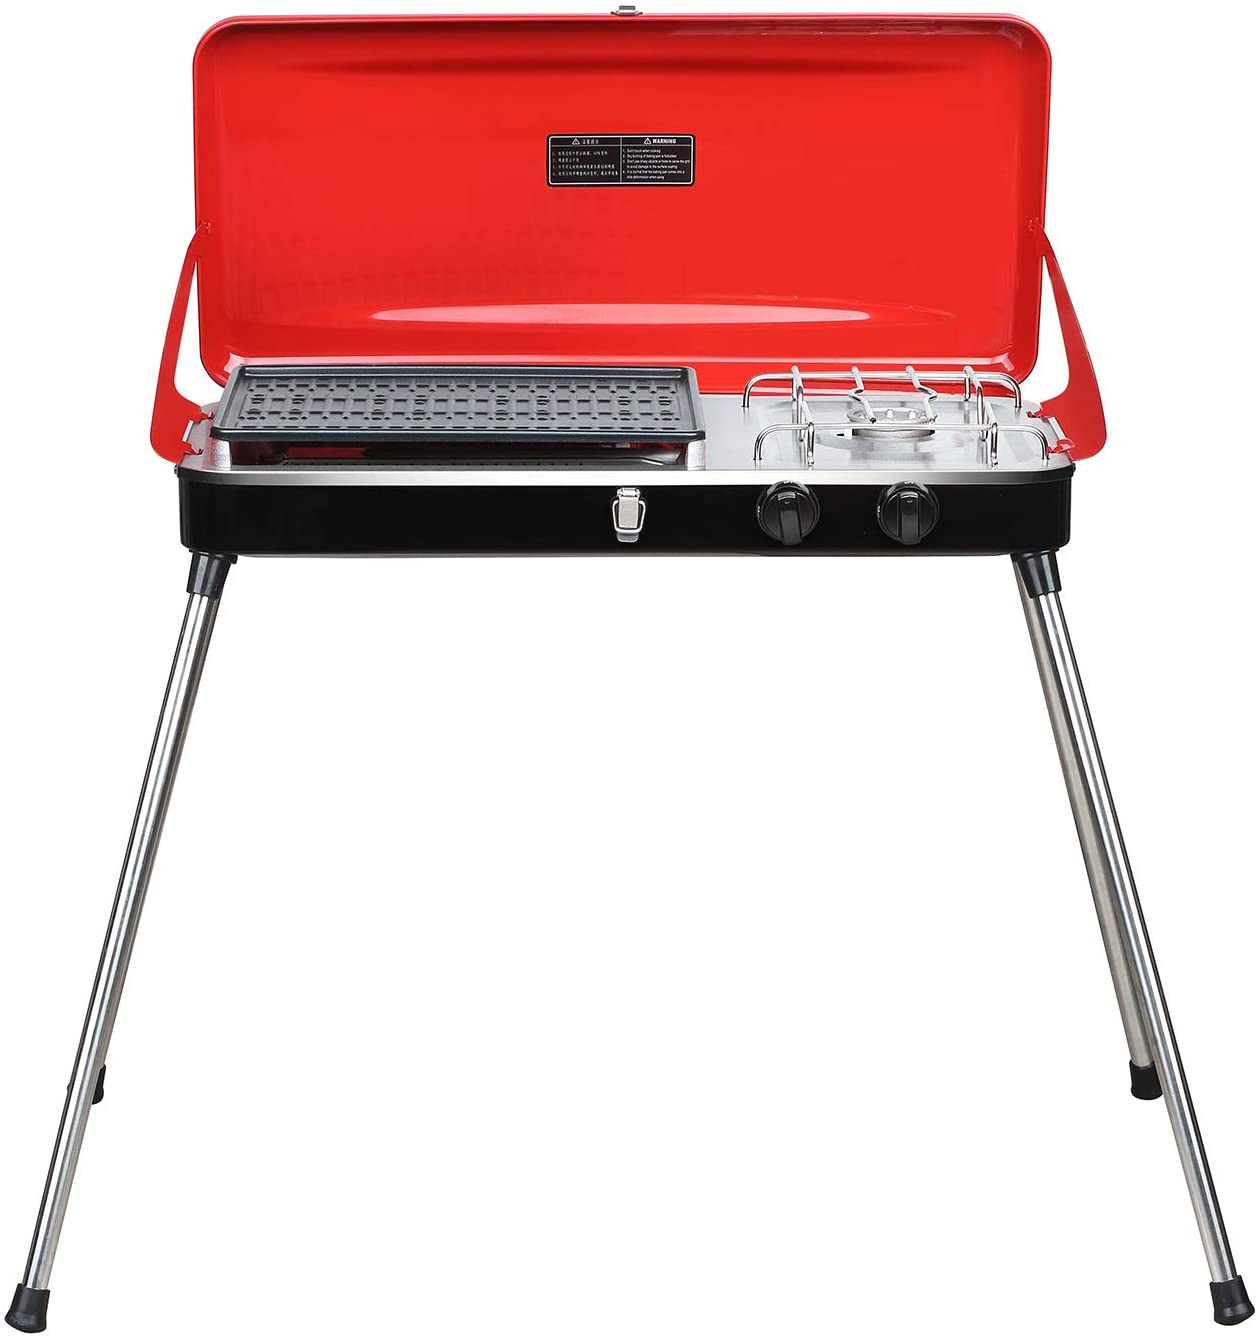 Camping Gas Grills Stove & Barbecue Grill With Legs